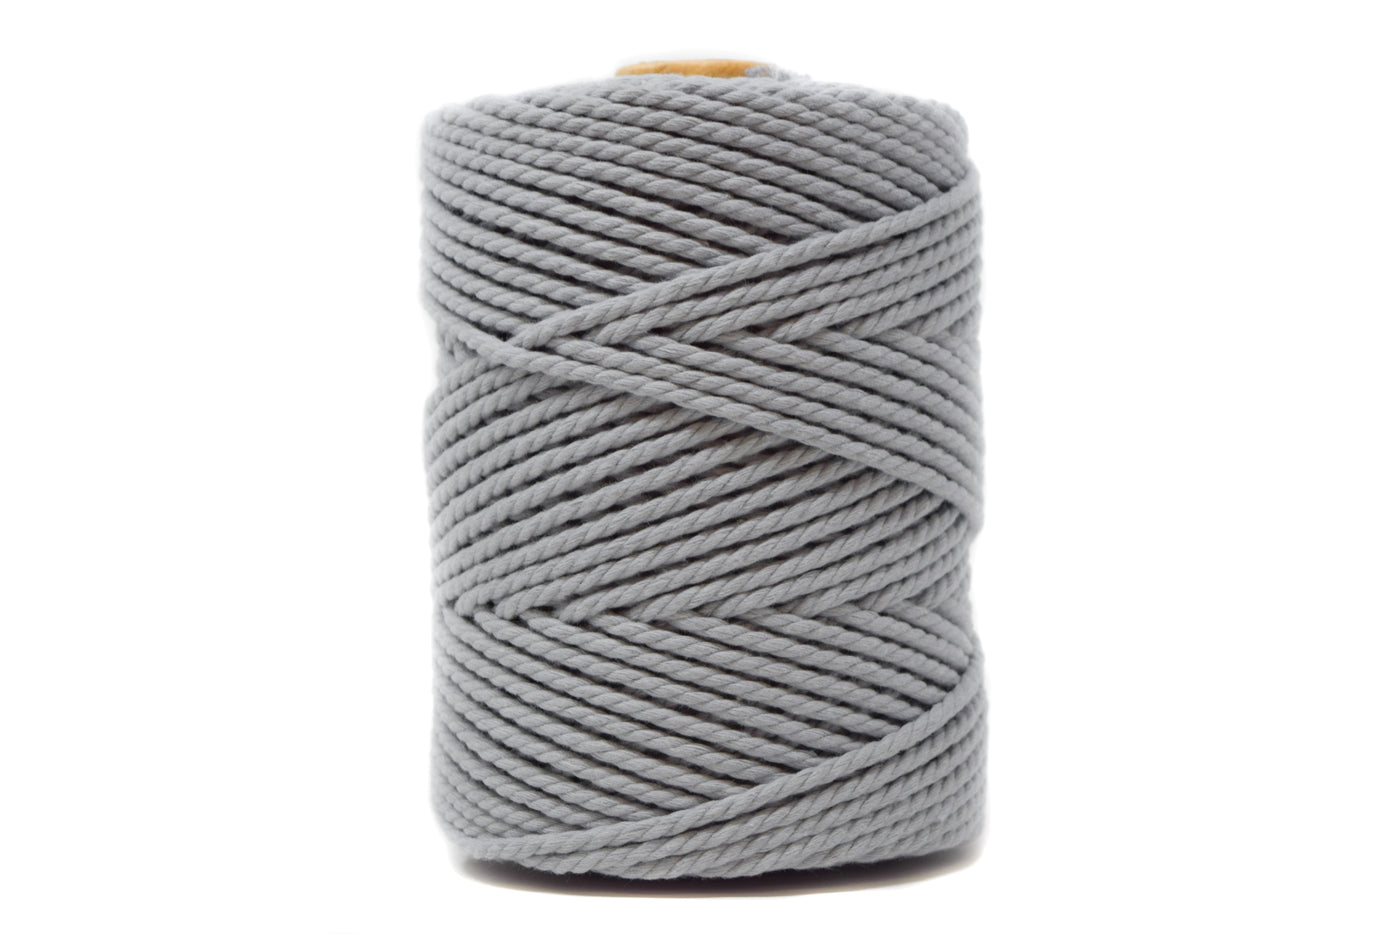 COTTON ROPE ZERO WASTE 3 MM - 3 PLY - SOFT GRAY COLOR